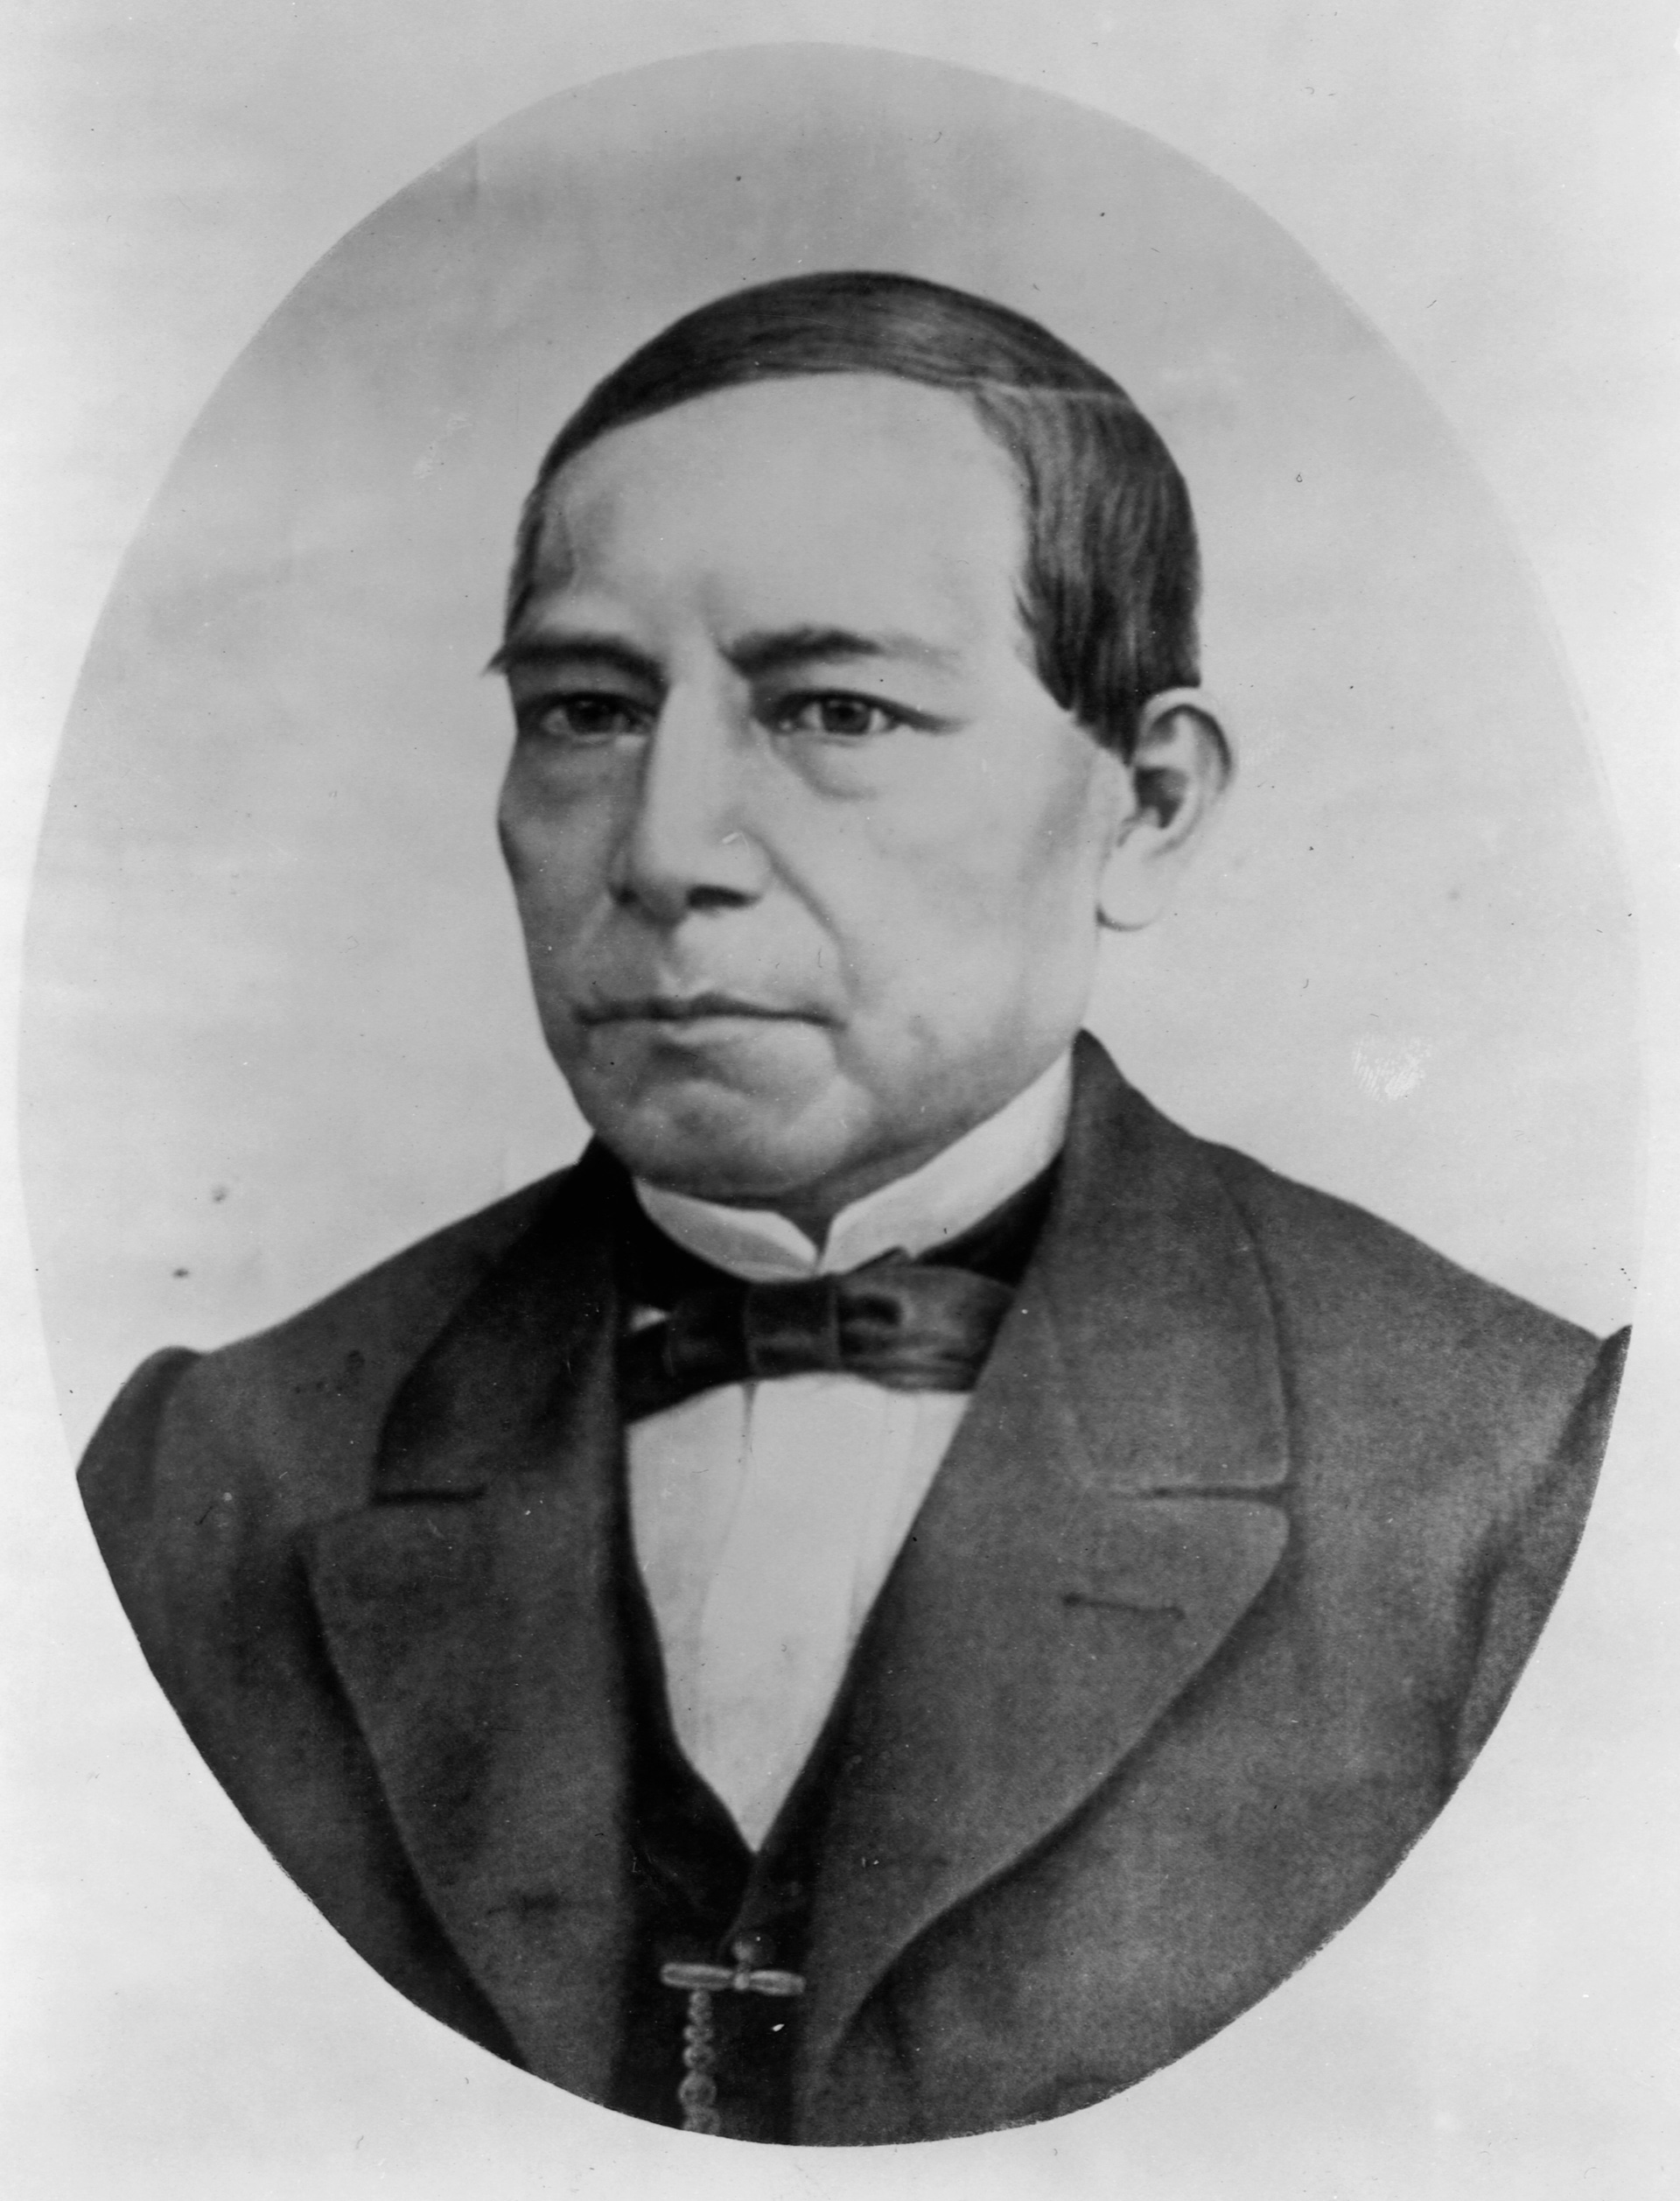 Benito Juárez was born on March 21, 1806 (Getty Images)